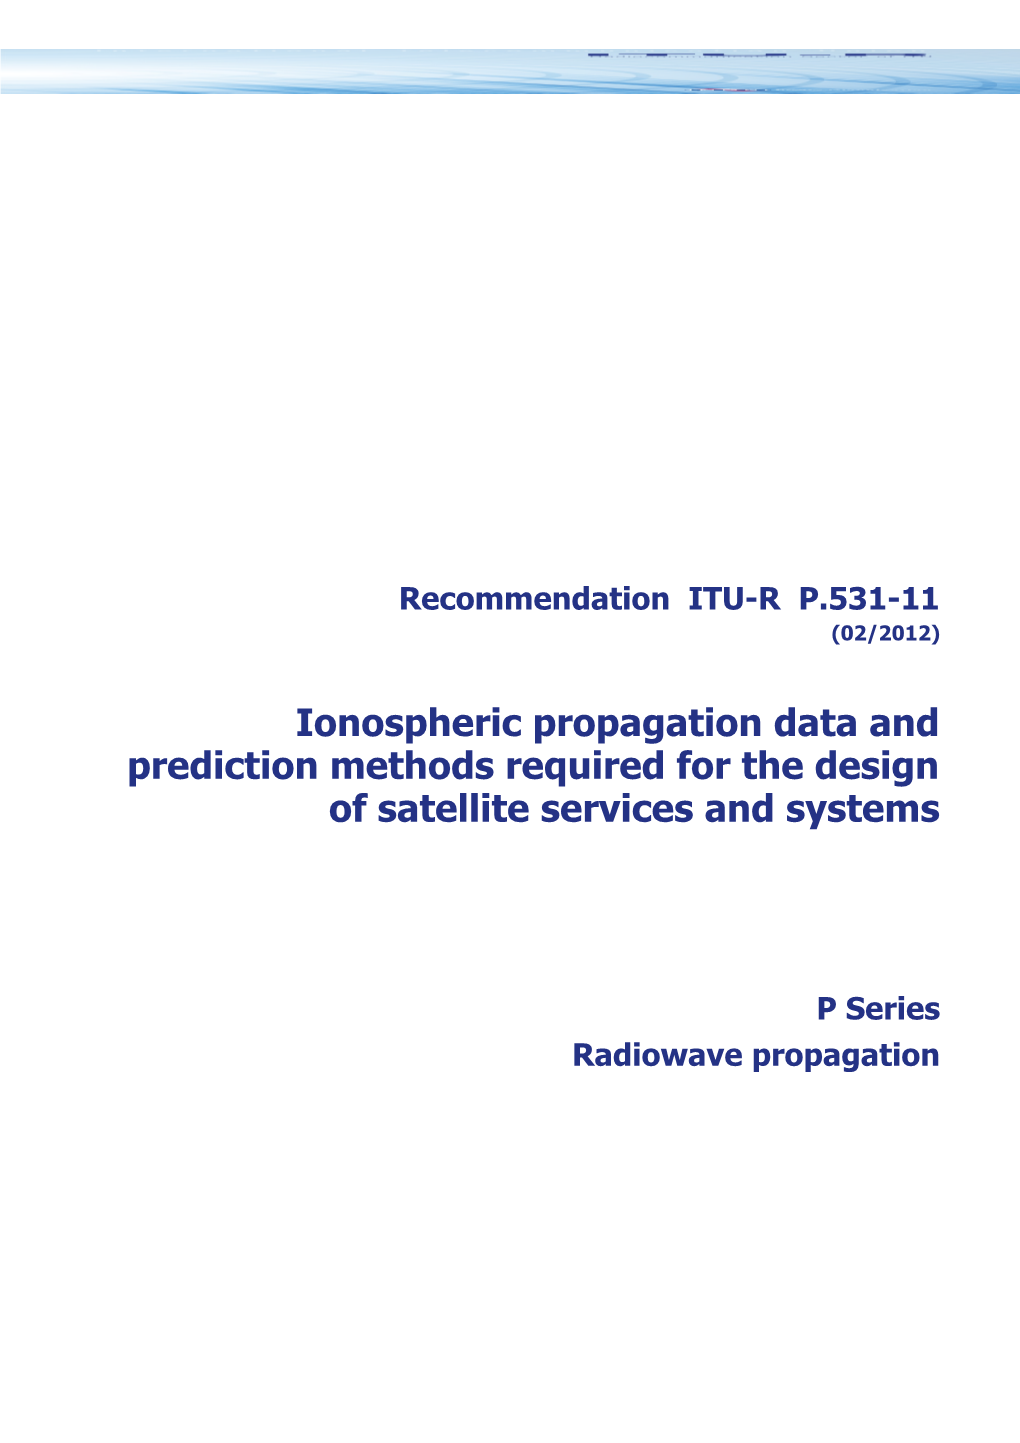 RECOMMENDATION ITU-R P.531-11 - Ionospheric Propagation Data and Prediction Methods Required